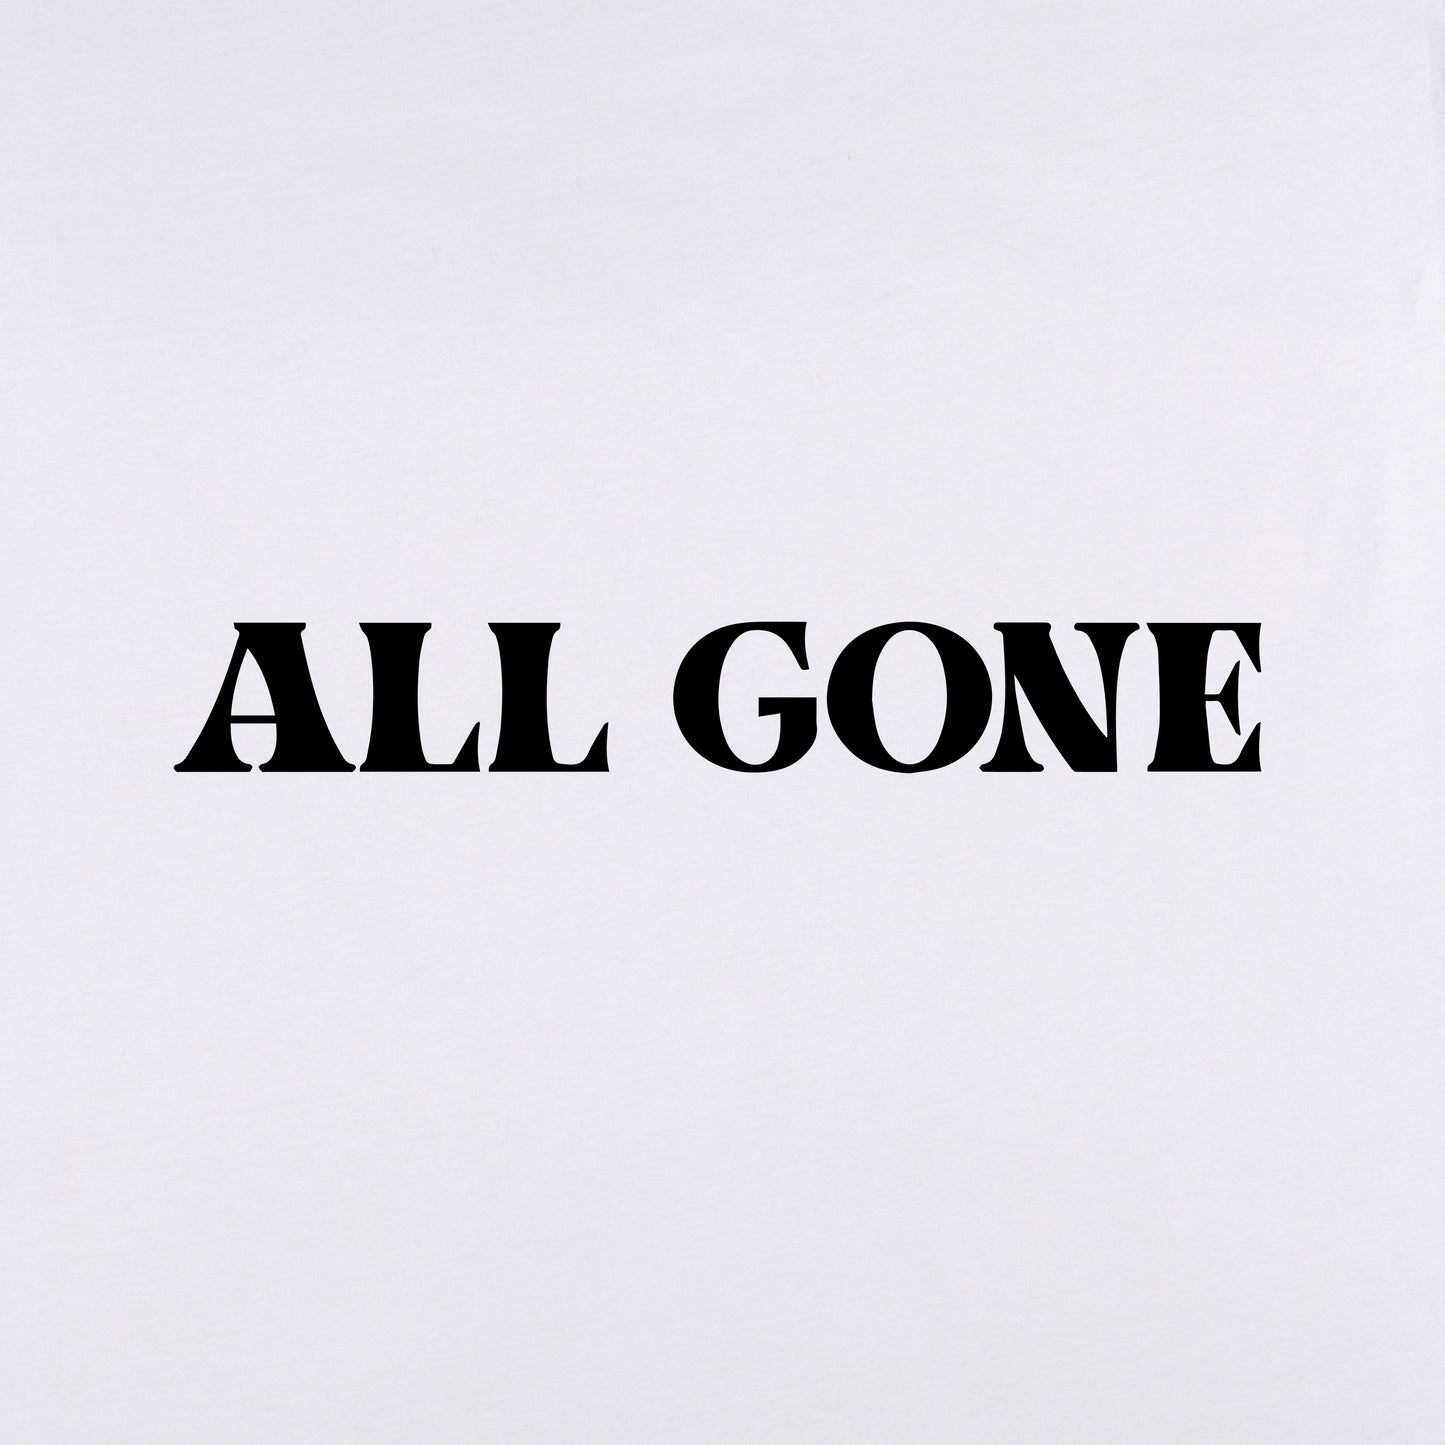 T-Shirt "ALL GONE" by DEL263